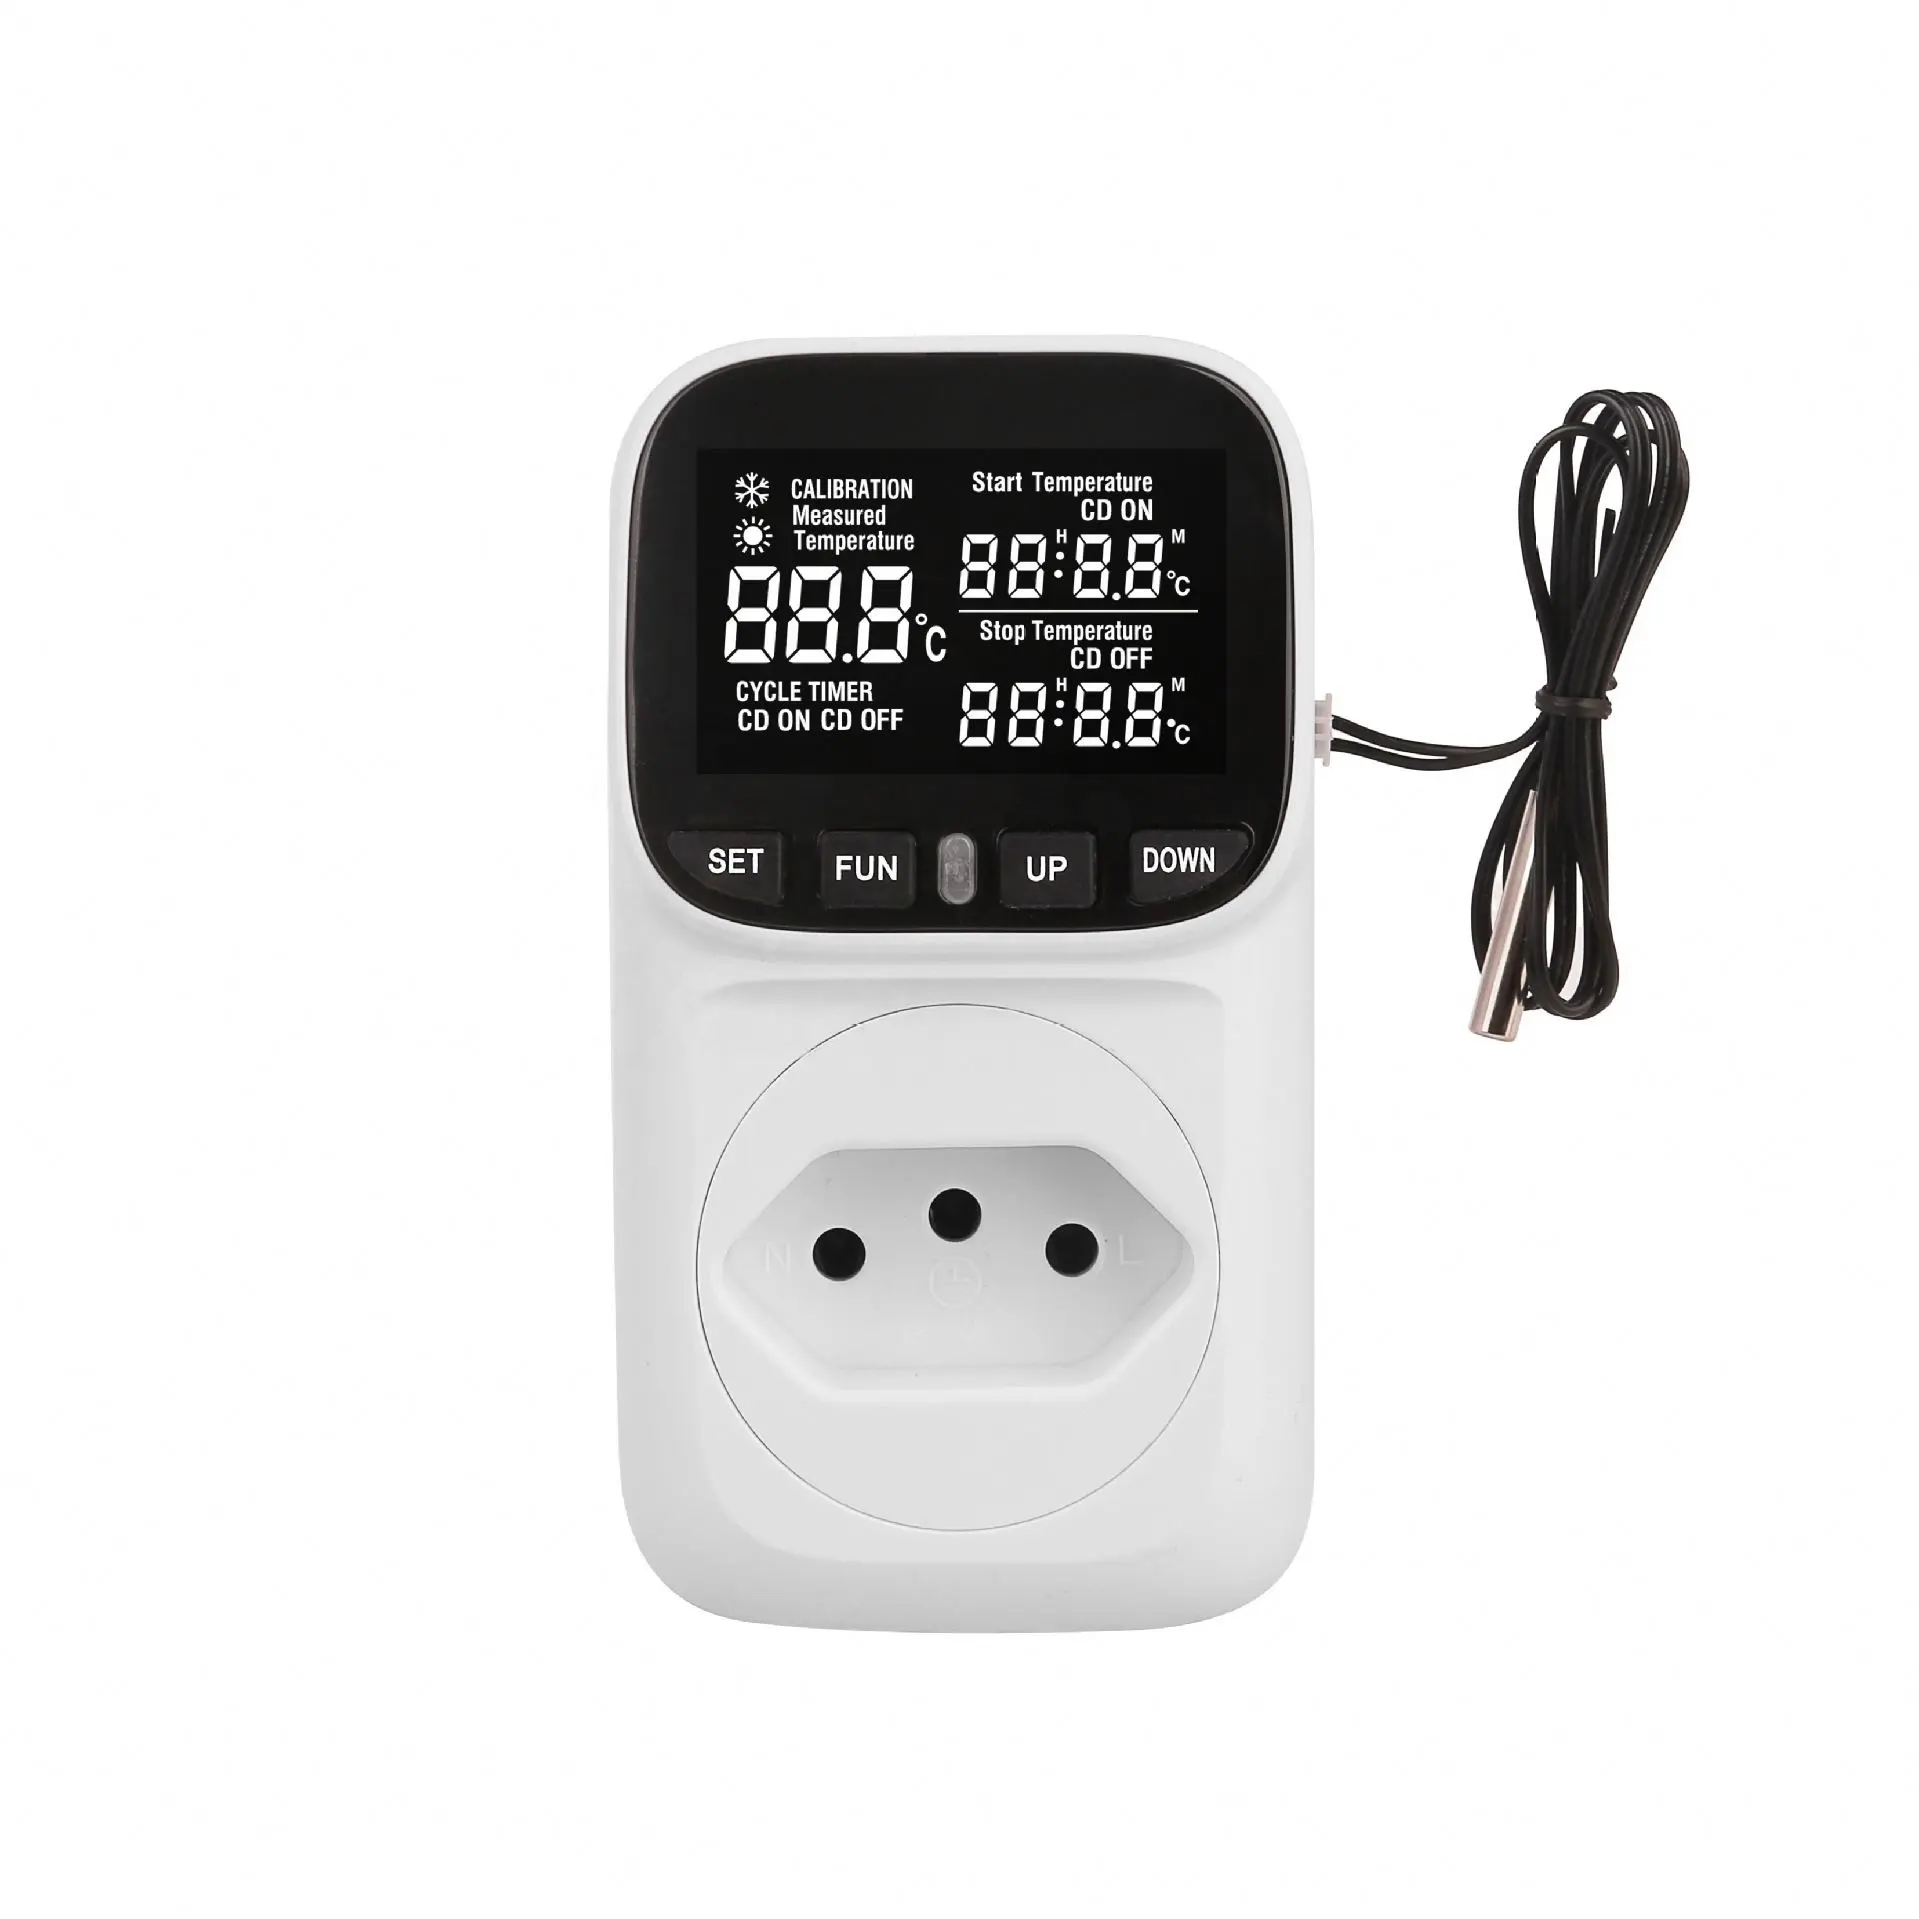 New backlight Brazil temperature control socket countdown thermal switch controller fish tank pet heating thermostat